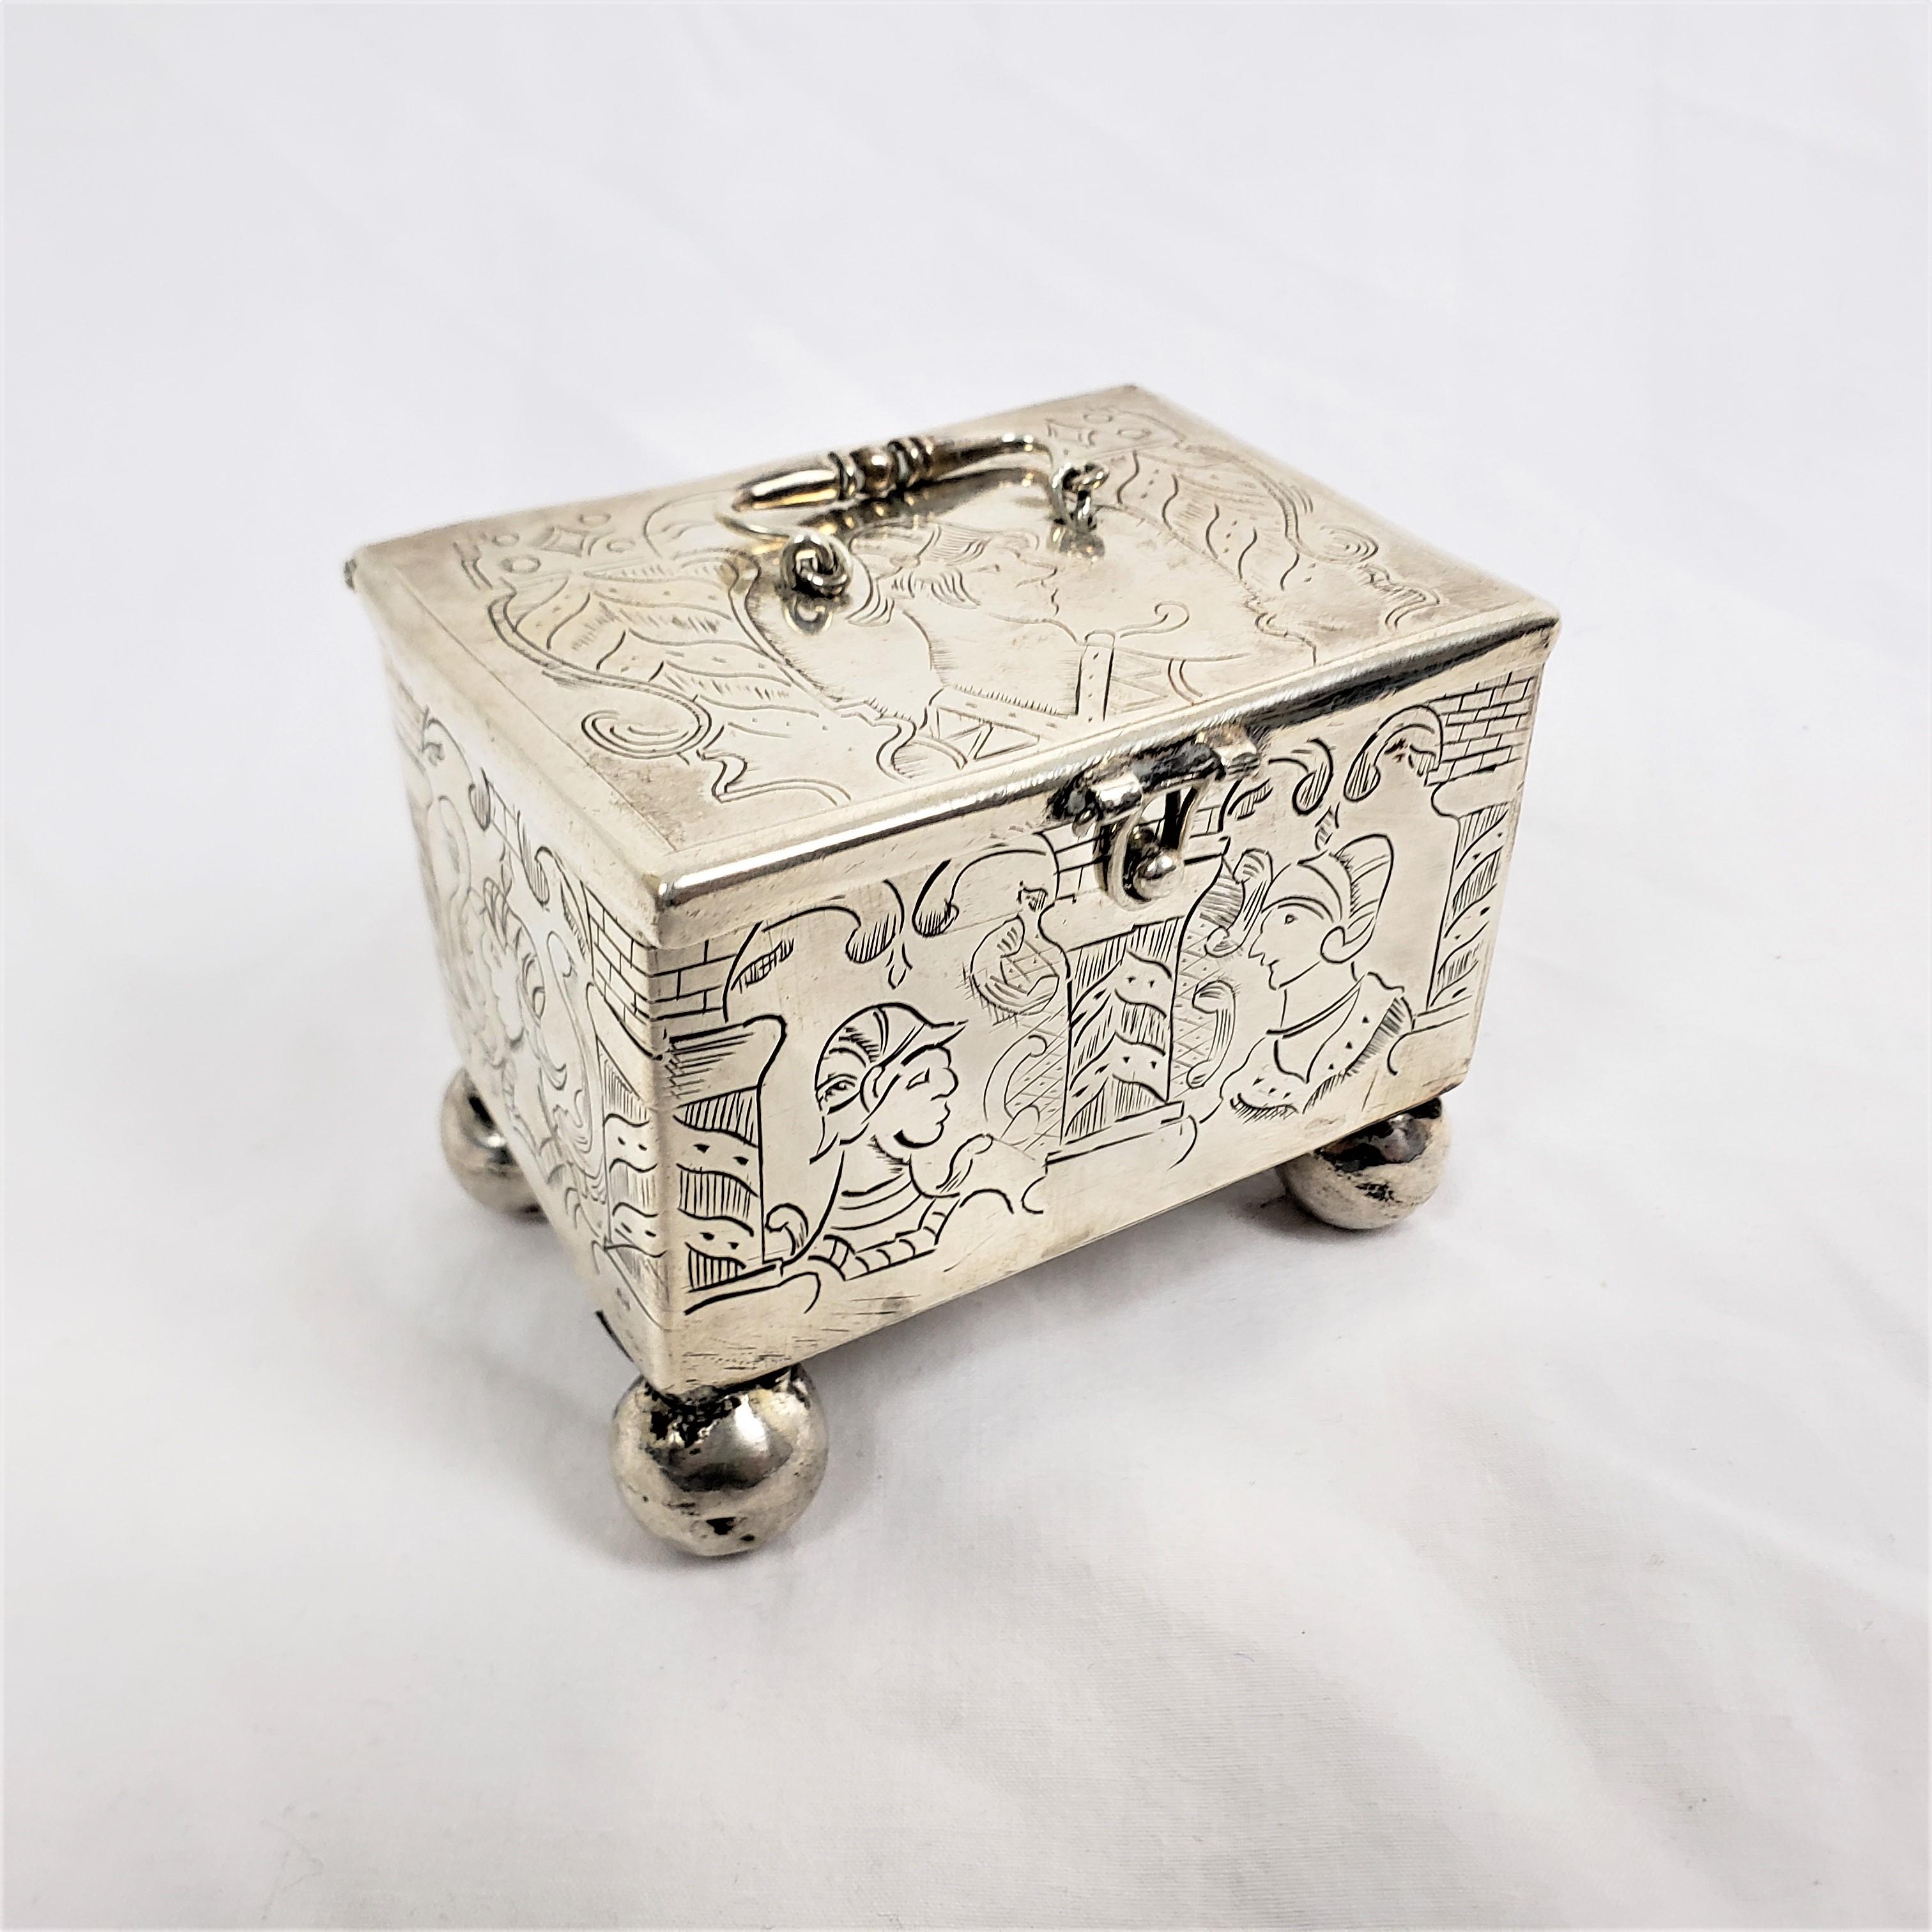 Rococo Antique Sterling Silver Dutch Marriage Box with Engraved Rococco Styled Figures For Sale